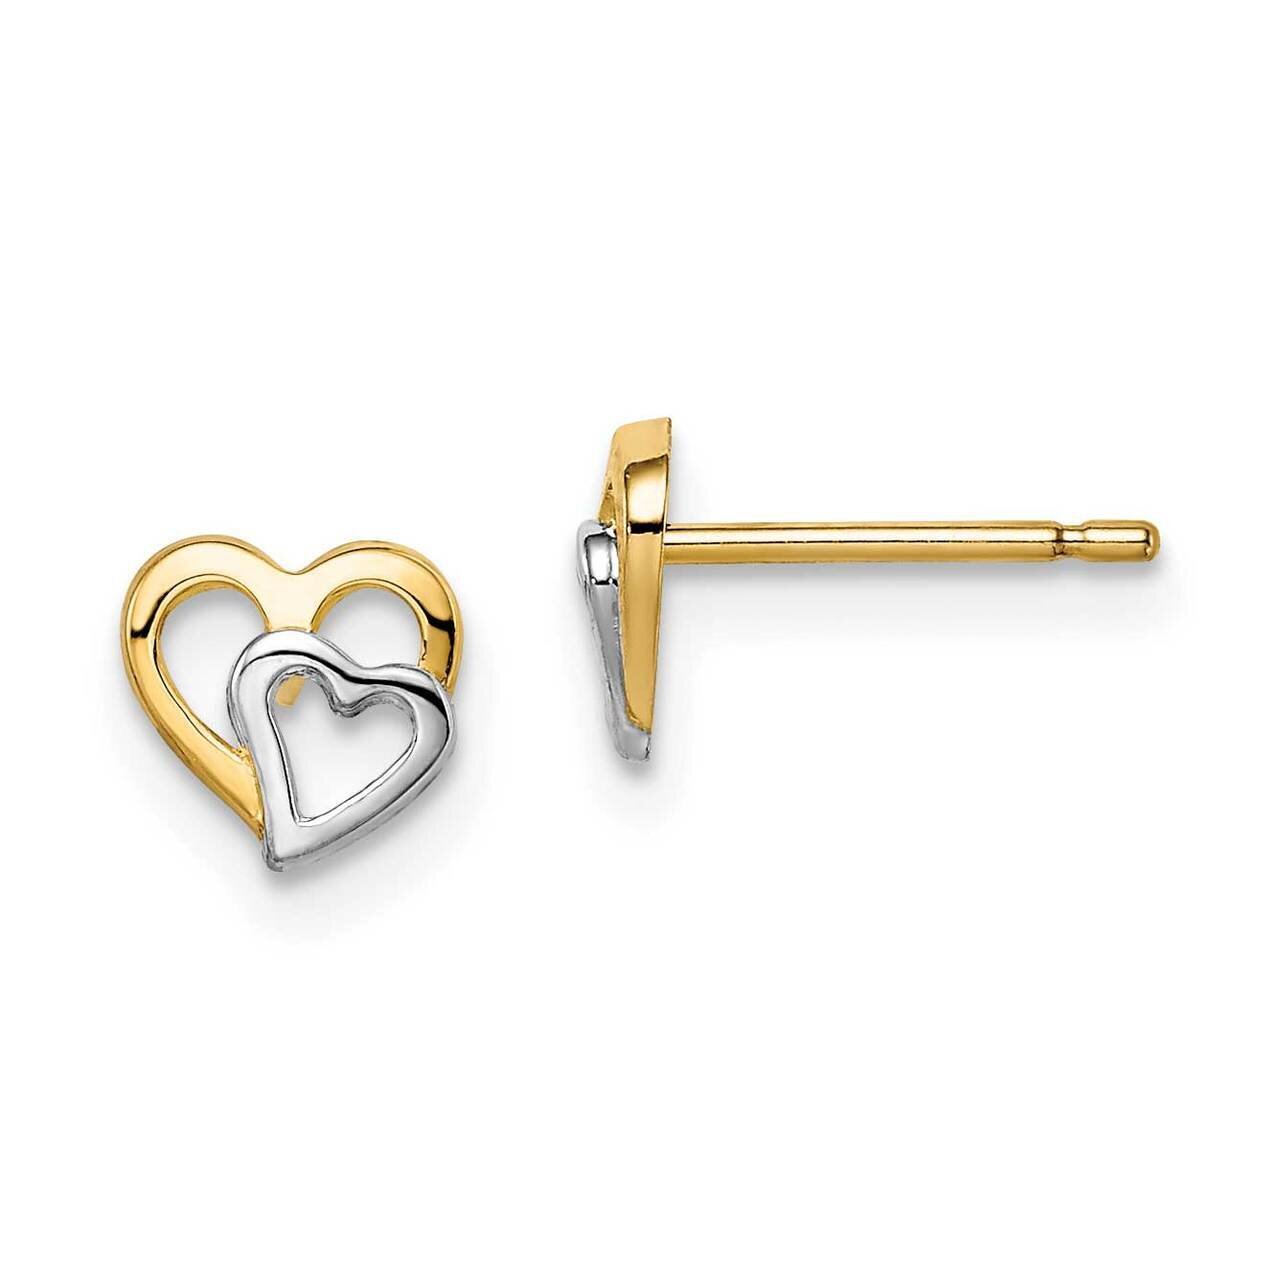 Cut-out Hearts Post Earrings 14k Gold & White Rhodium GK986